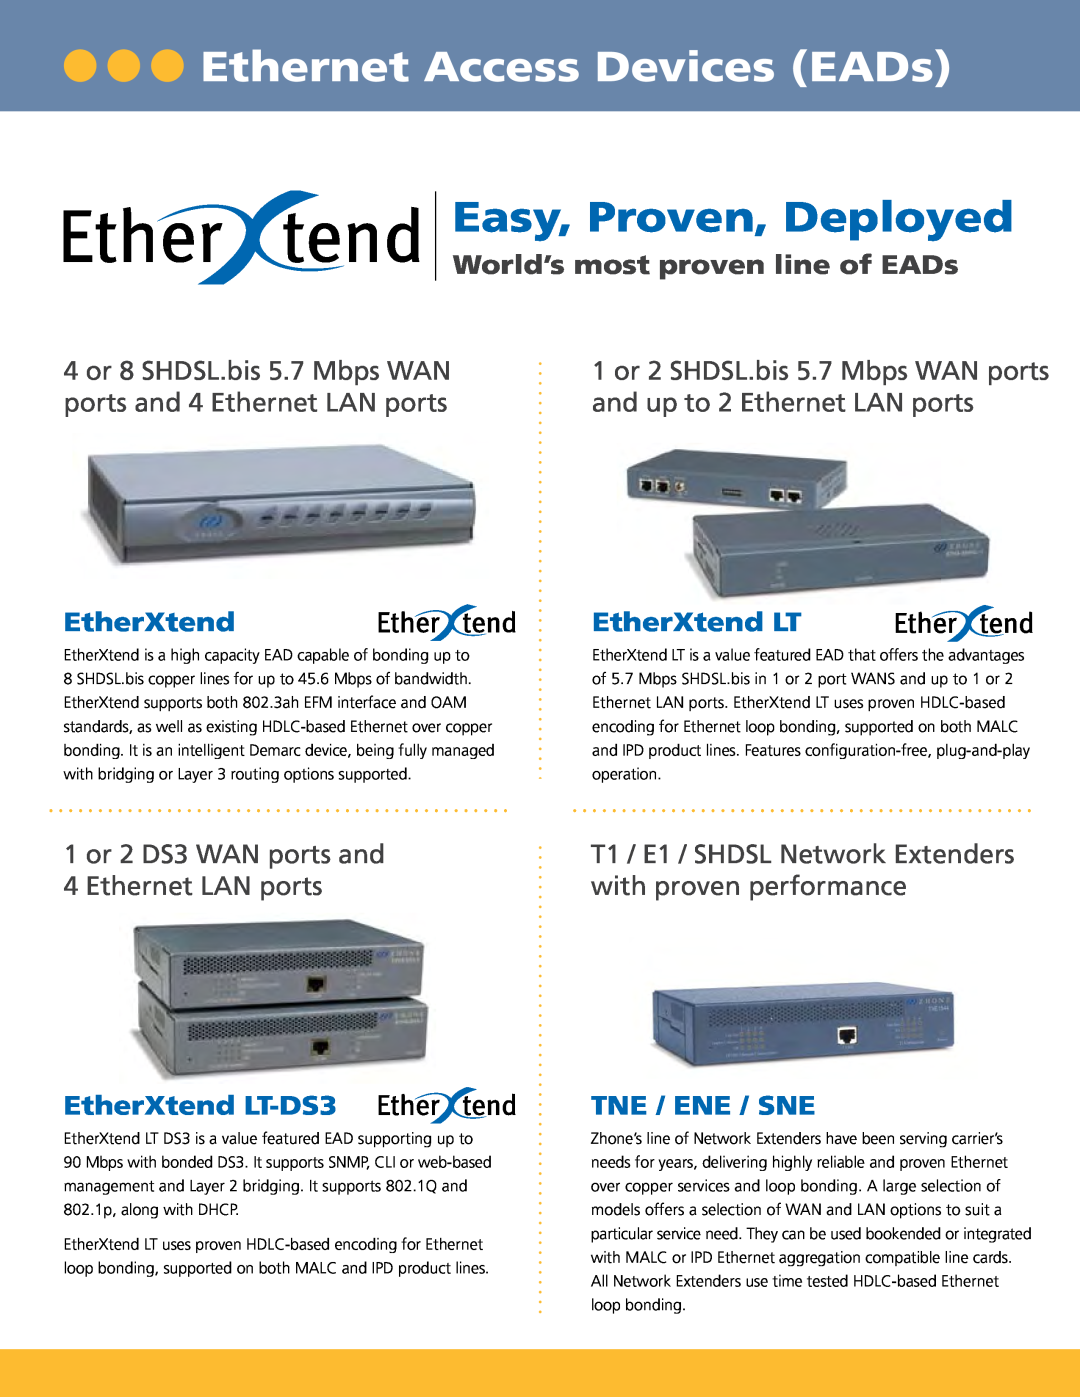 Zhone Technologies Copper-Based Ethernet Ethernet Access Devices EADs Product Category, Easy, Proven, Deployed, EtherXtend 